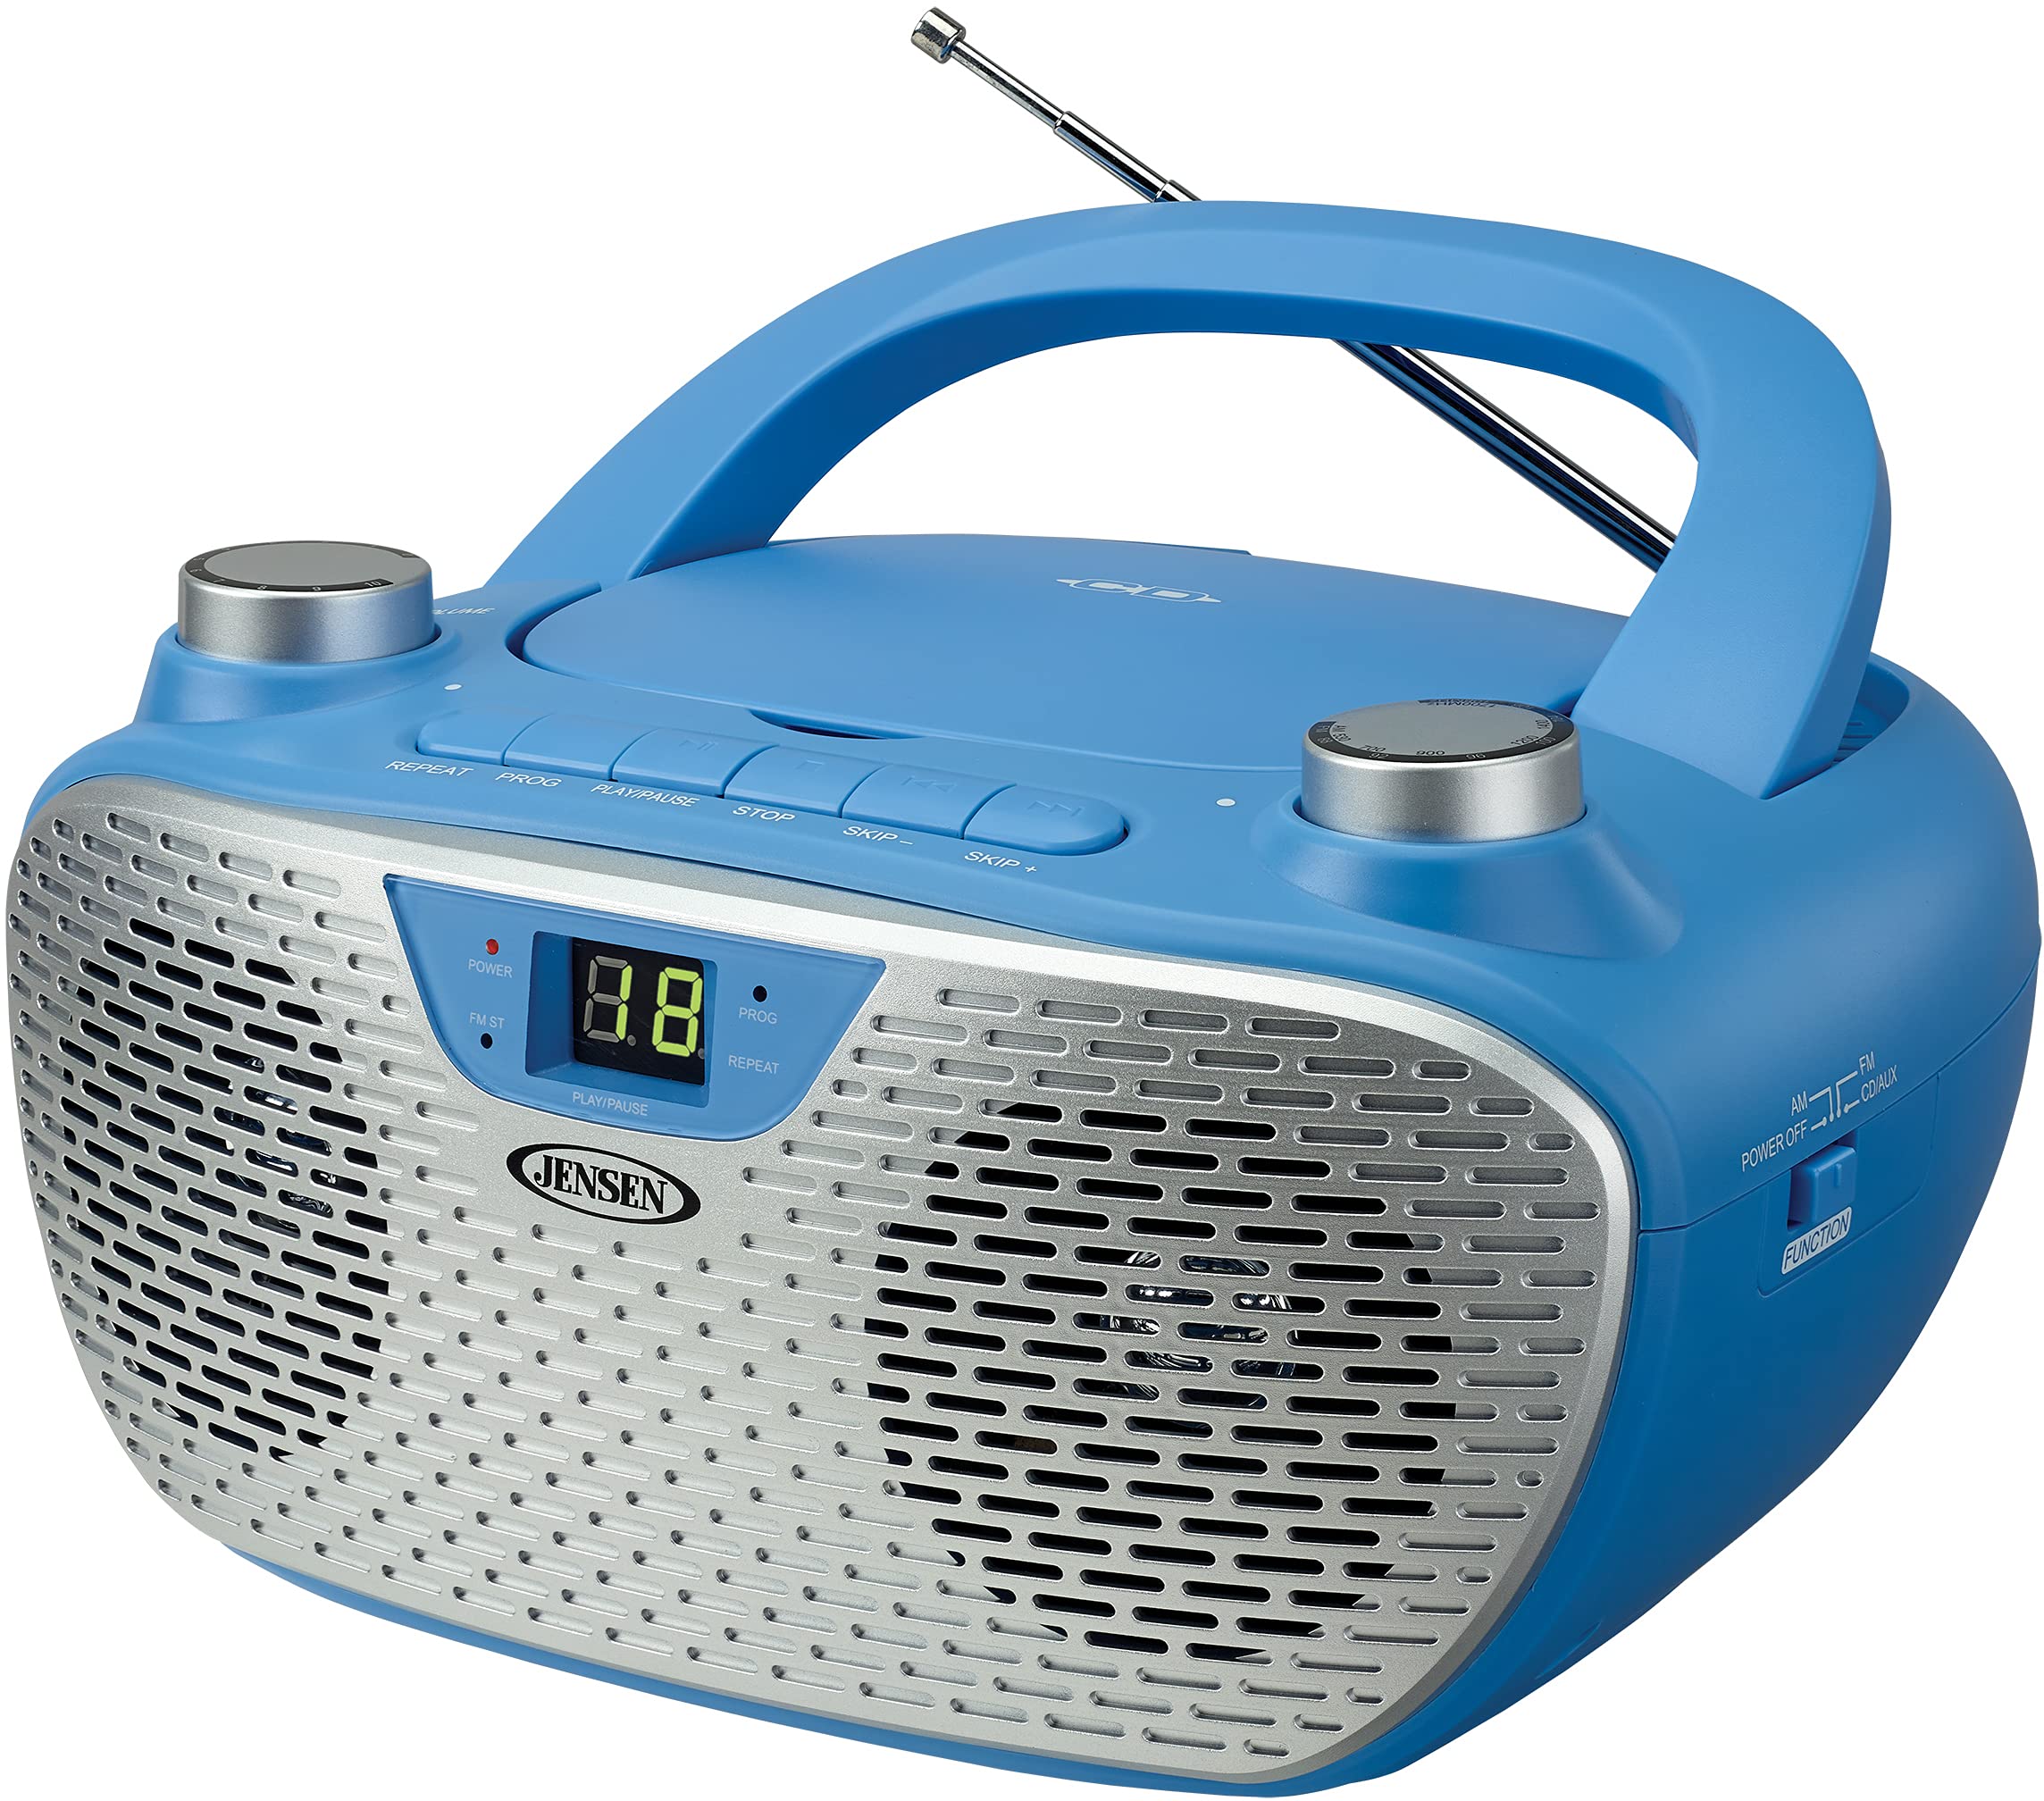 JENSEN CD-485BL BLUE COMPACT BOOMBOX WITH CD PLAYER